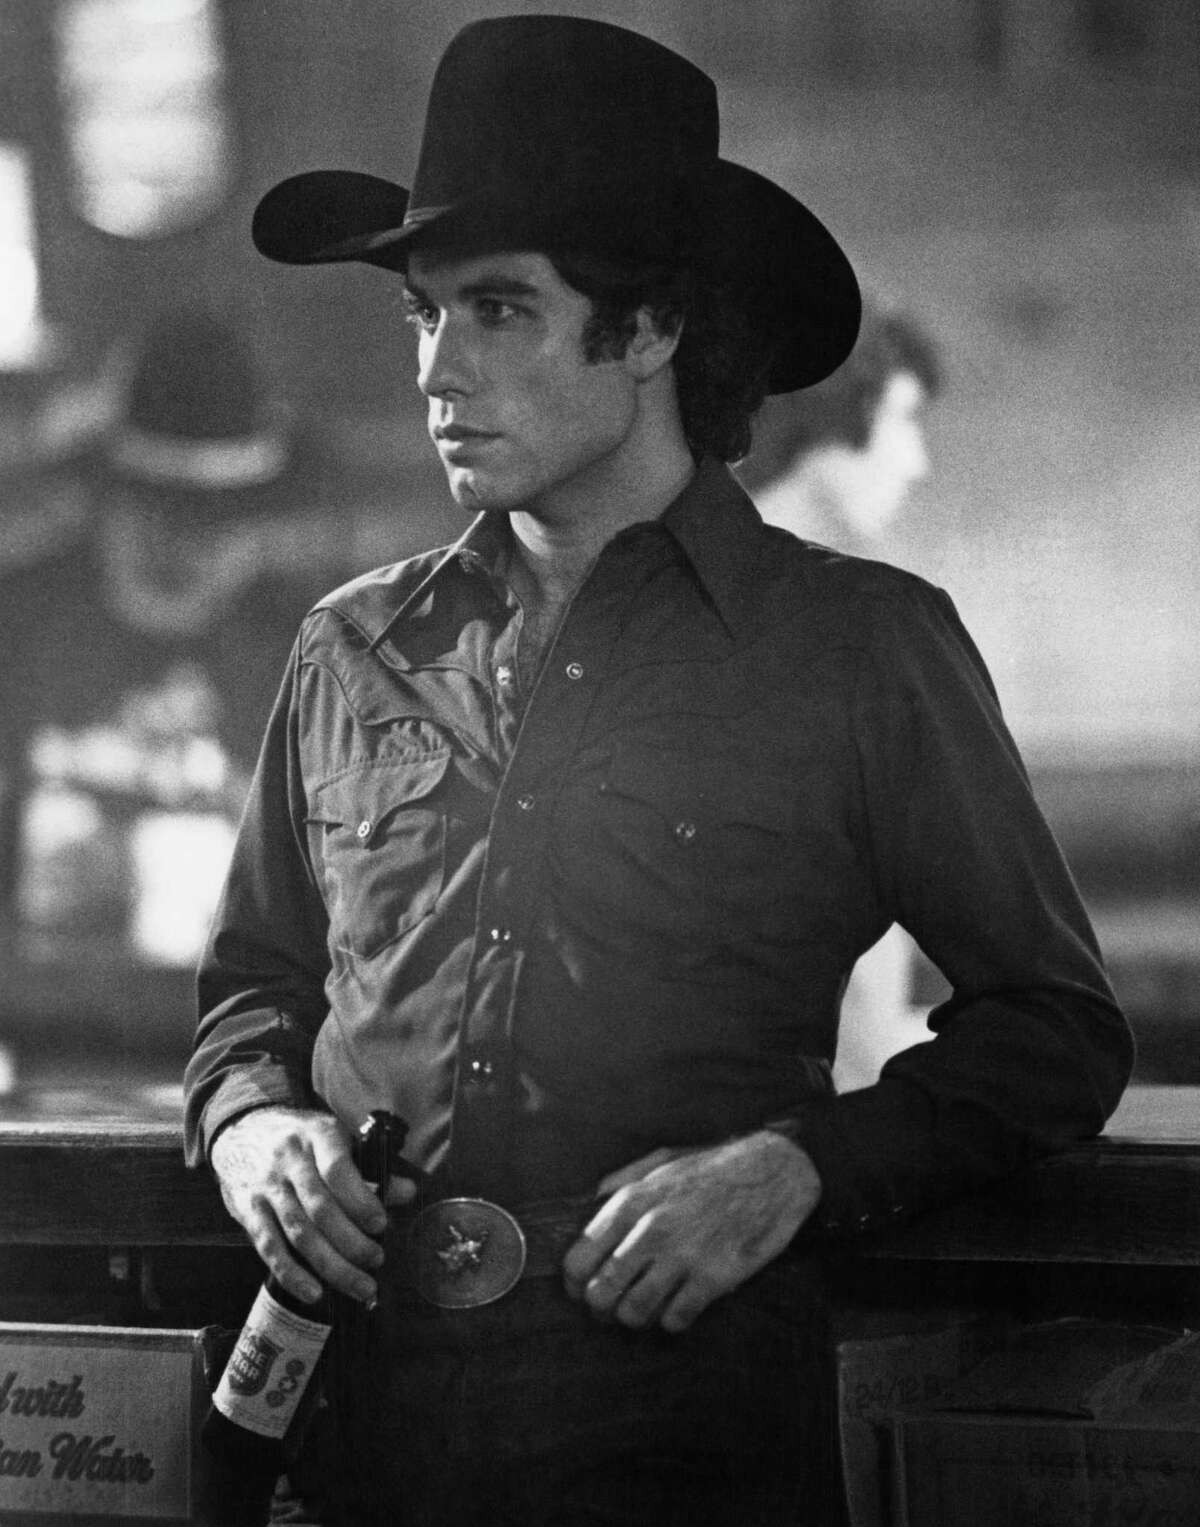 John Travolta with a bottle of Lone Star beer in the 1980 film, “Urban Cowboy.”